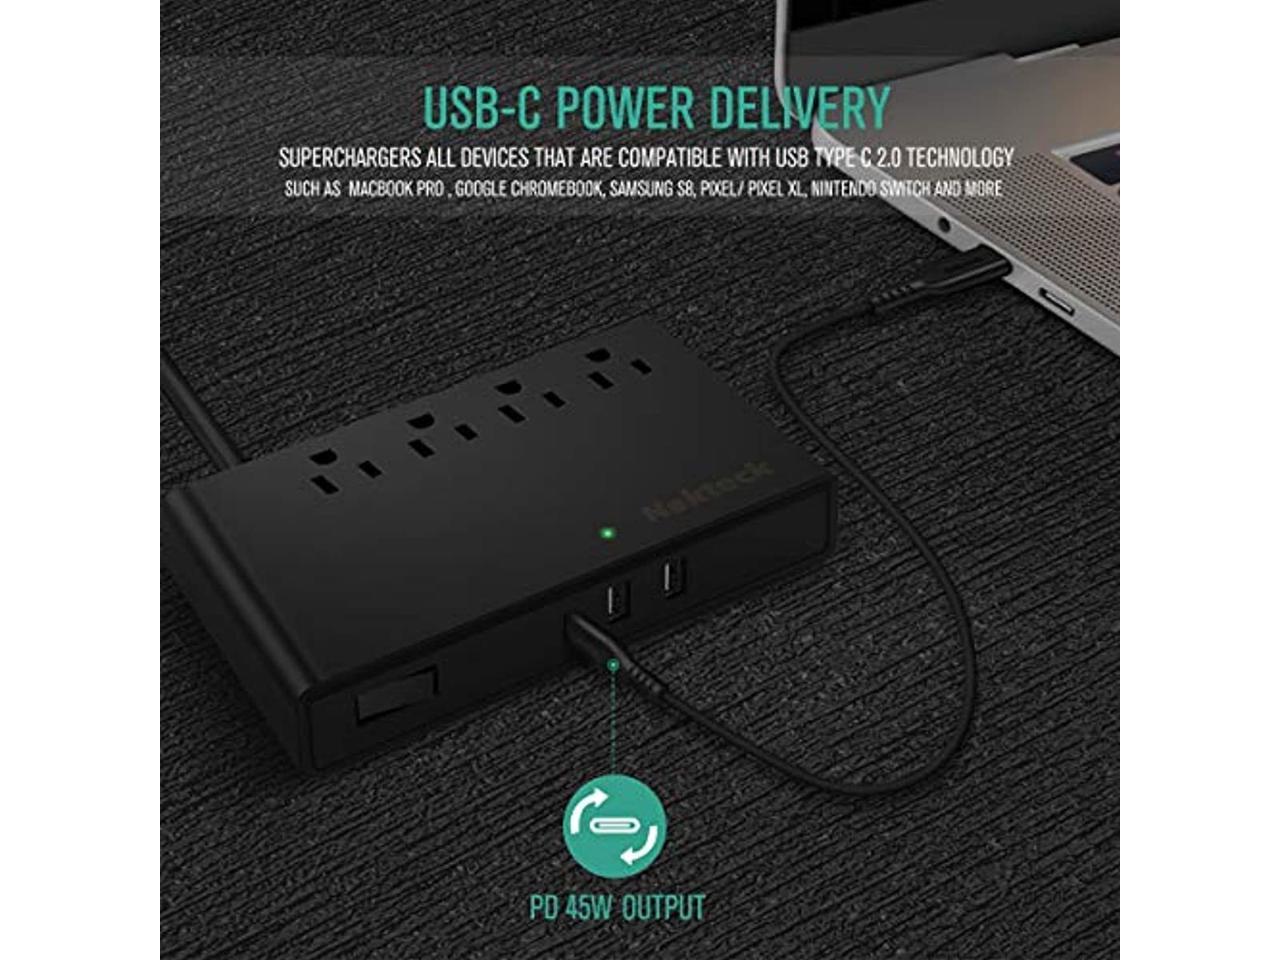 USB C Surge Protector Desktop Charging Station,Nekteck Flat Plug Power Strip with USB C 45W PD Power Delivery and 2 USB-A Smart Charger Adapter 5V/2.4A Max,Total 22W 4 Outlets 5FT AC Power Cord